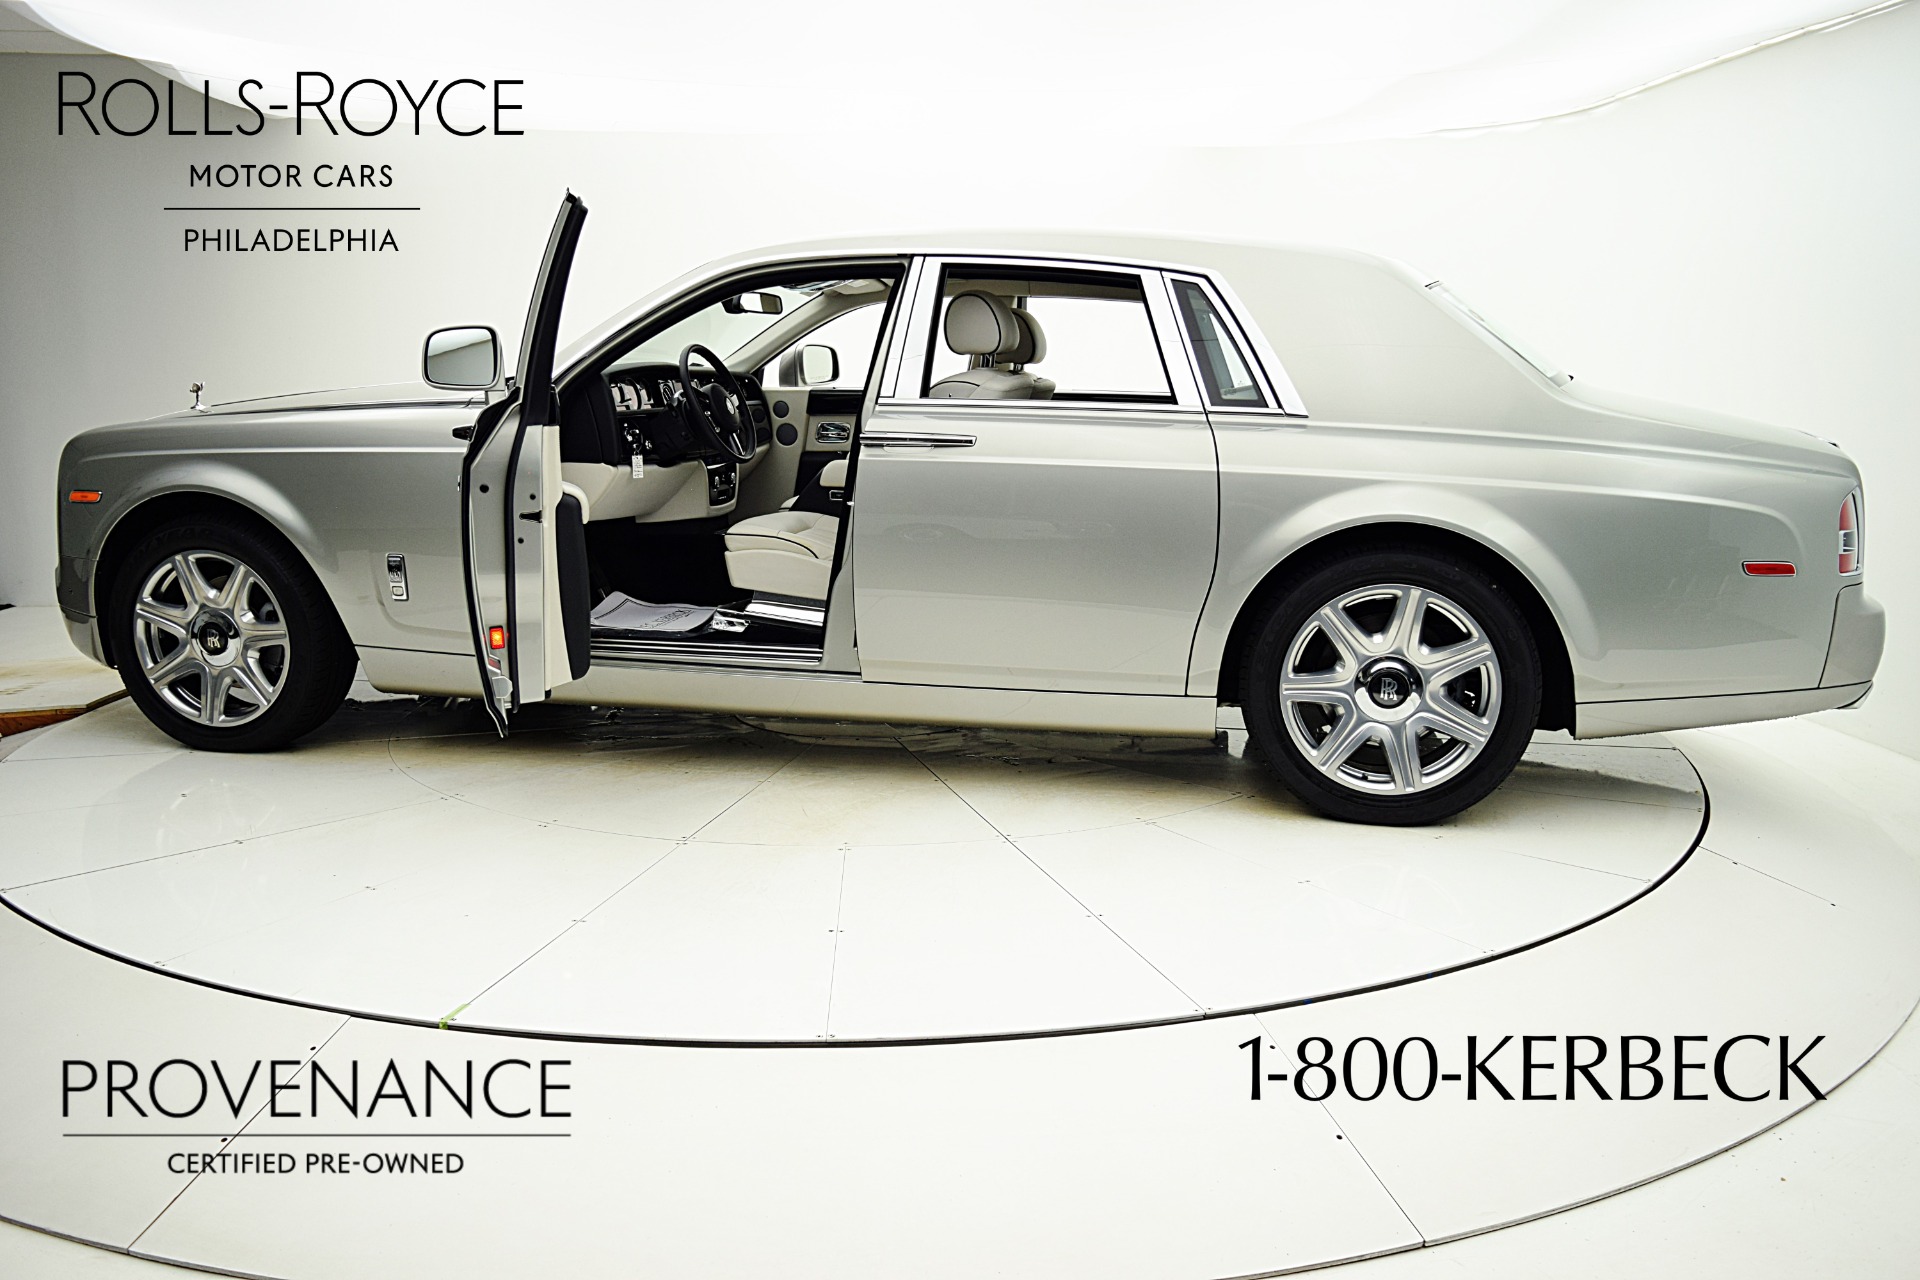 Rolls-Royce Had Record Sales as Average Price of Car Is $534,000